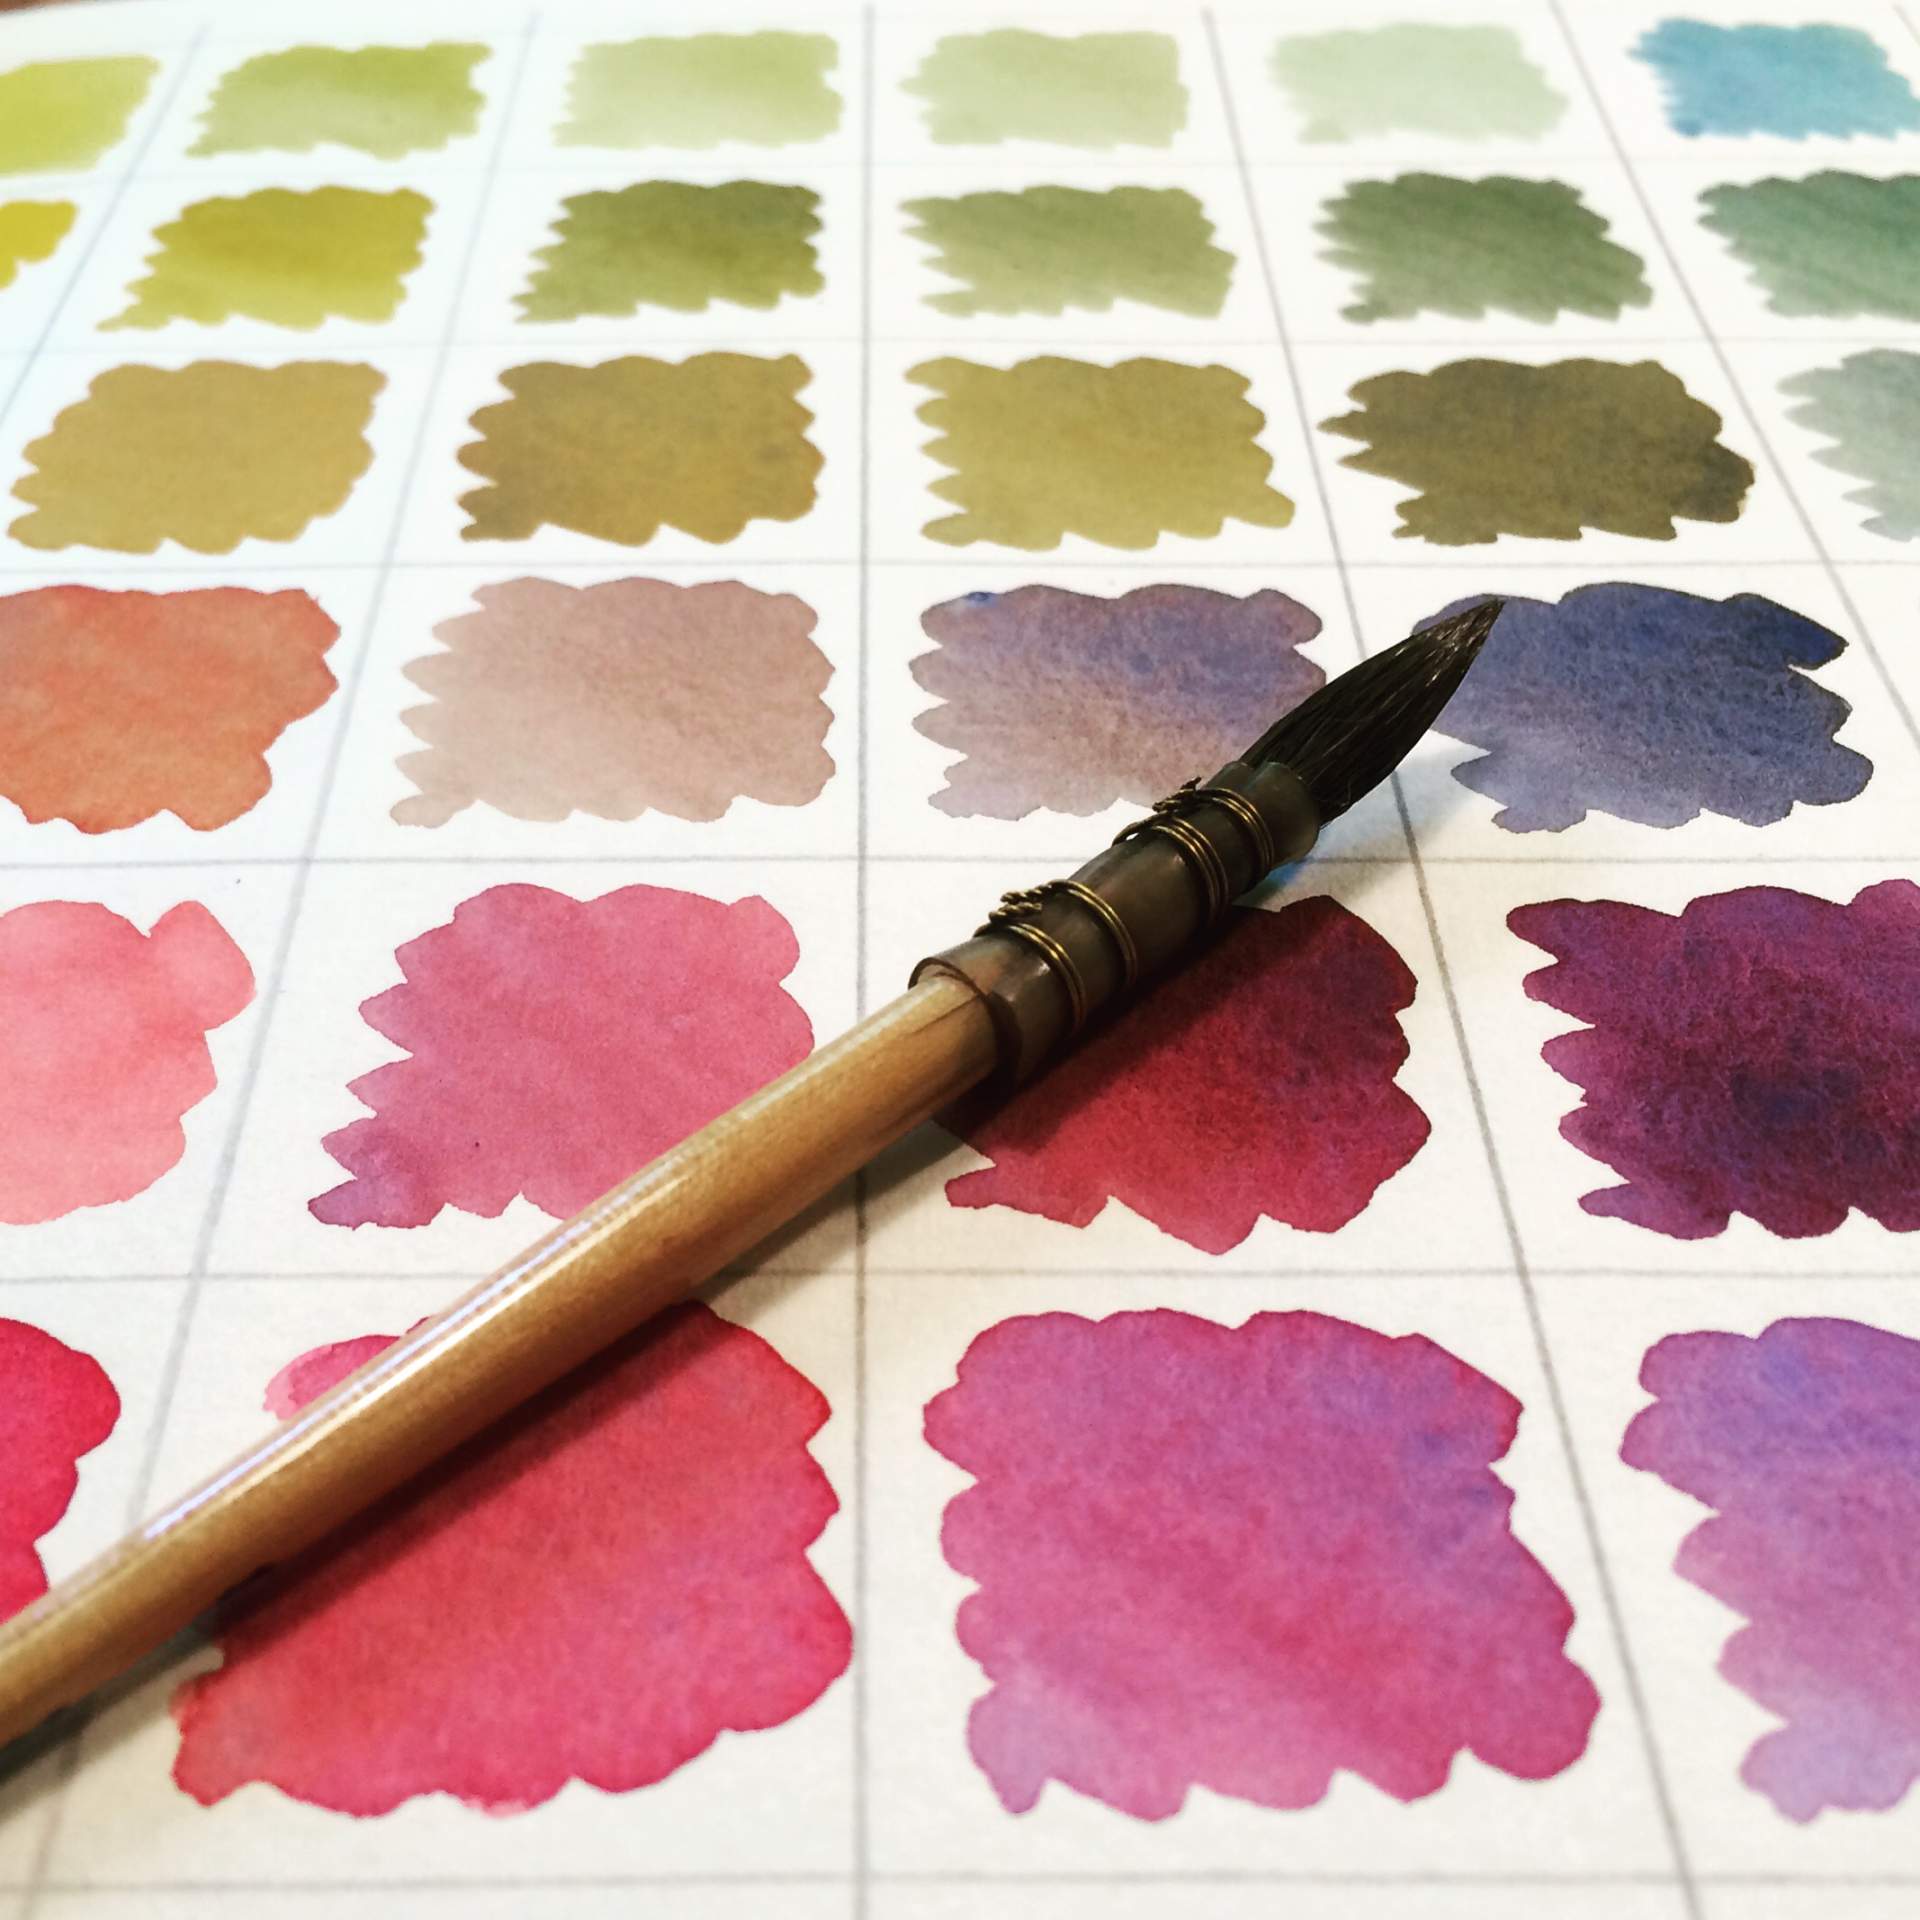 Colour Harmony: Making the most of a limited palette